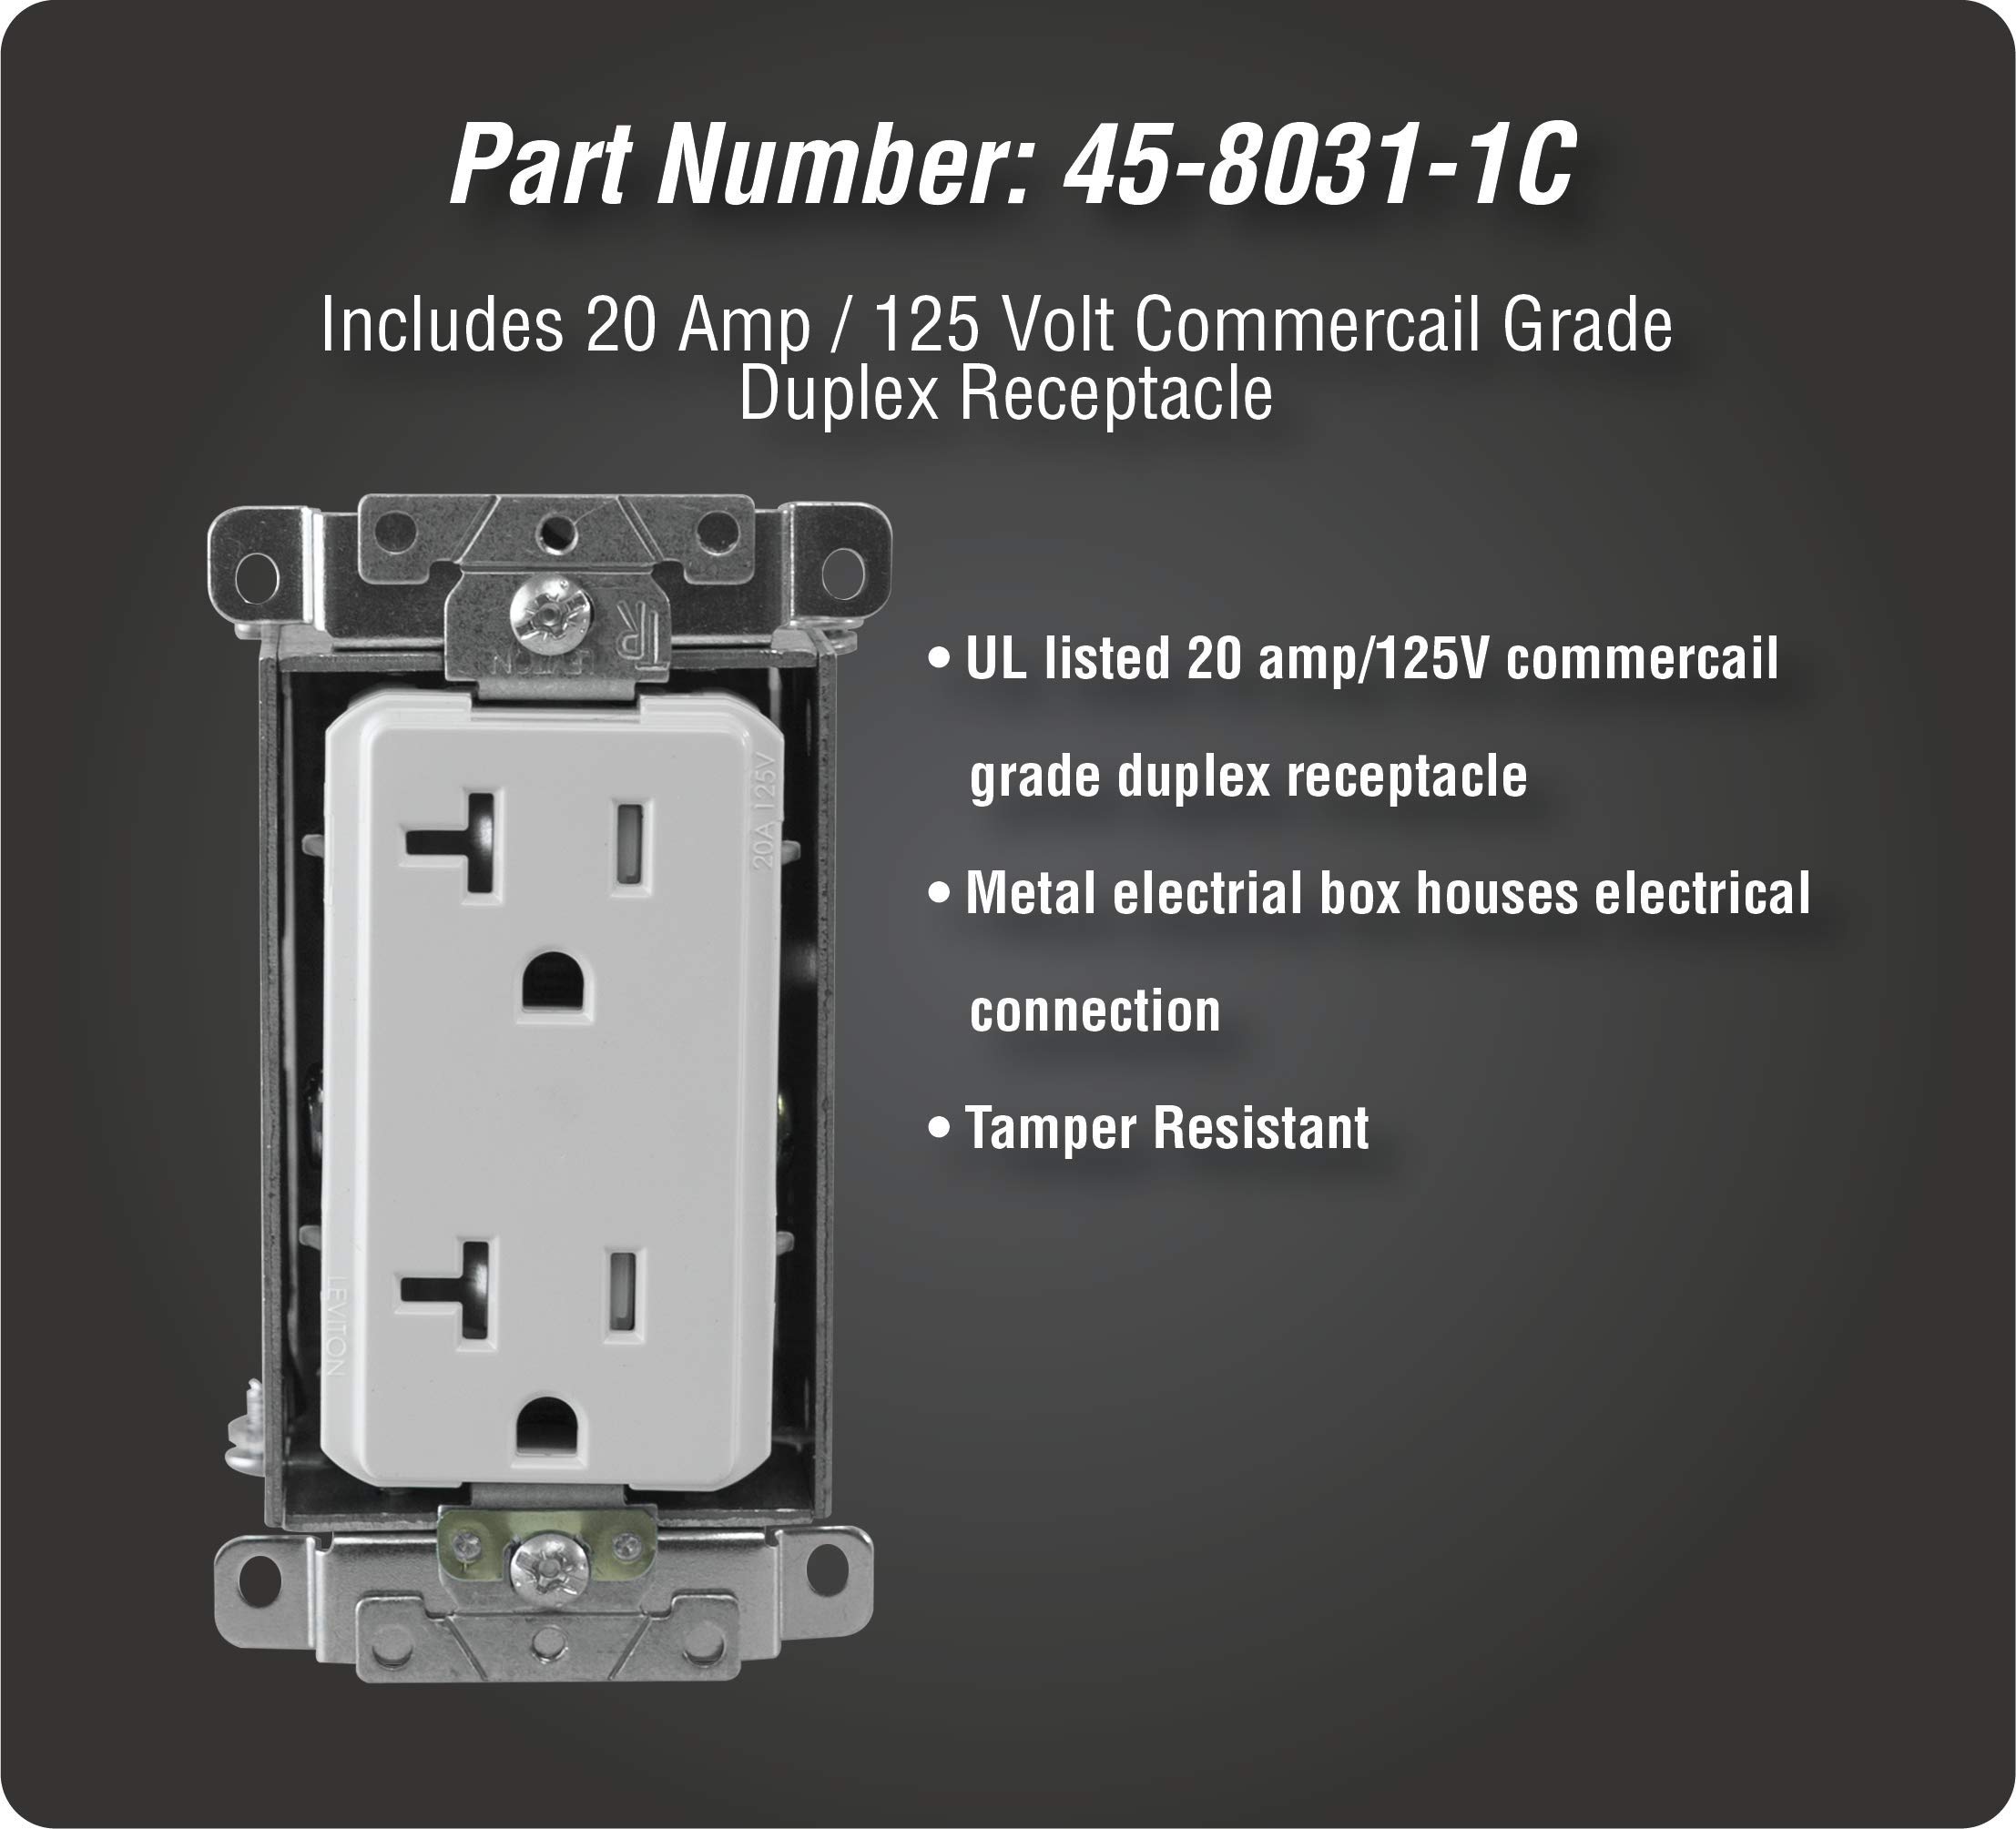 DATA COMM Electronics 45-8031-1C Connected Media Box with Duplex 20 Amp Commercial Grade Receptacle